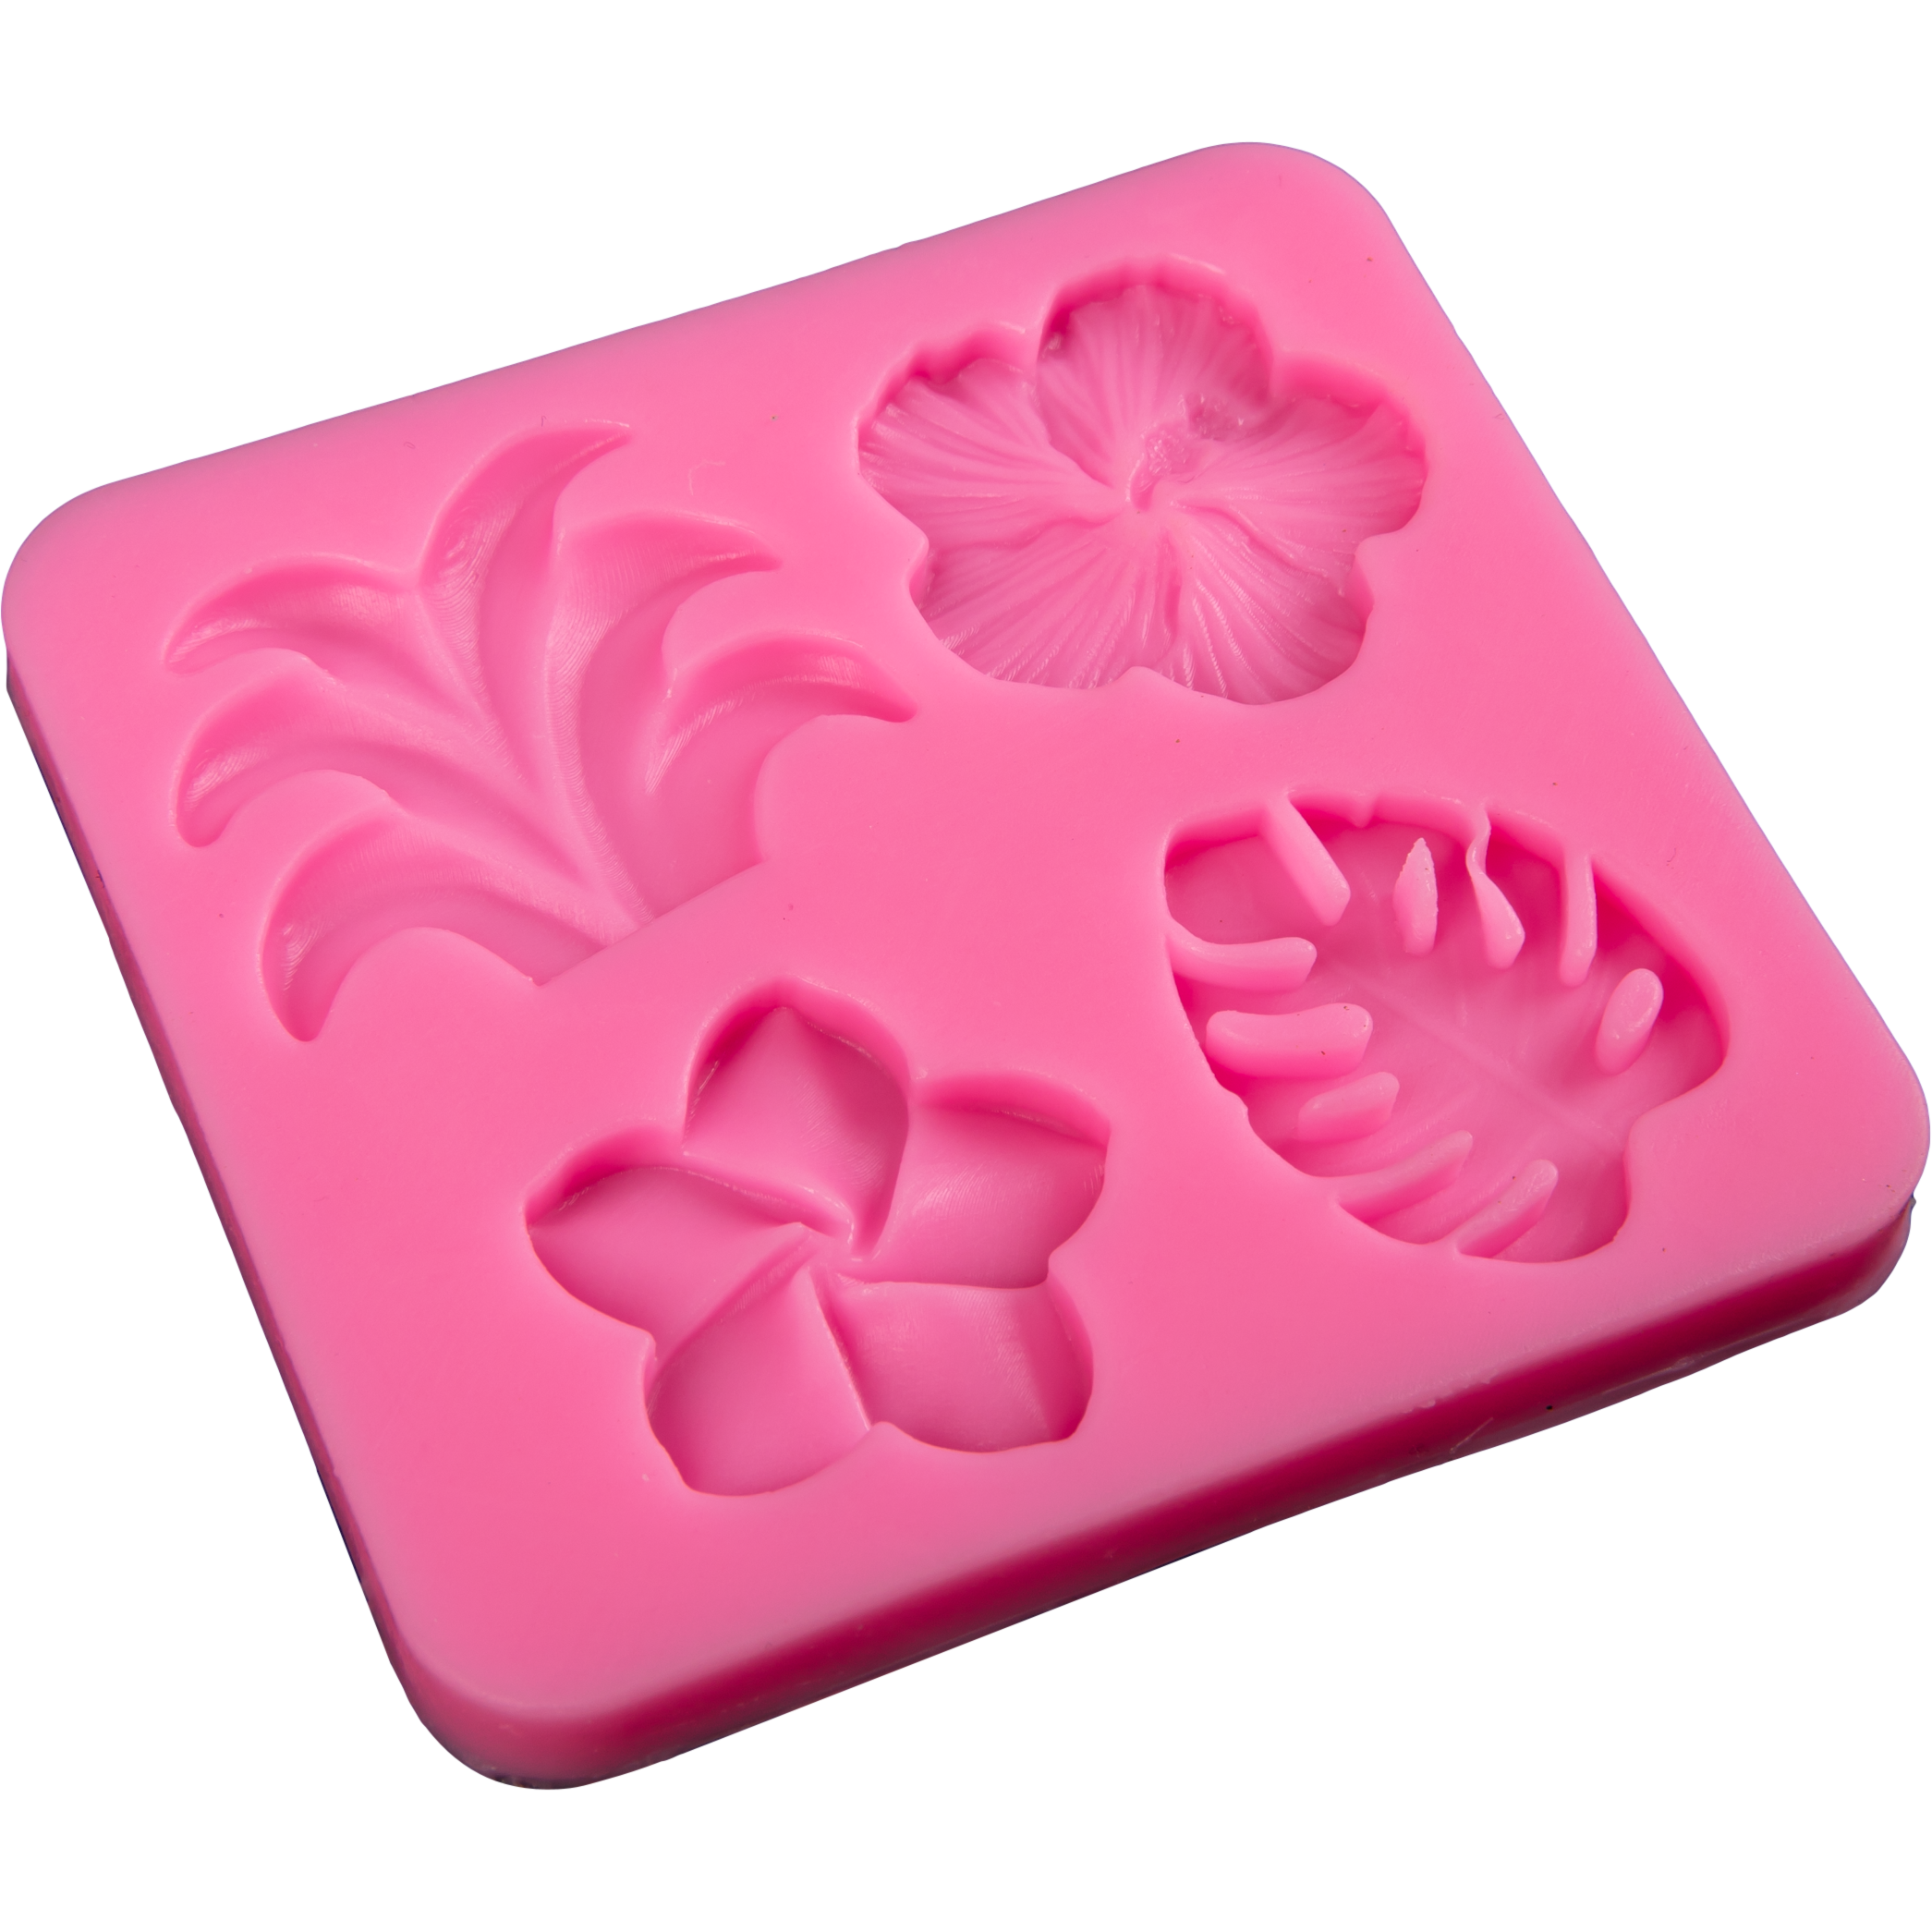 https://www.shopriot.shop/wp-content/uploads/1689/03/shop-smarter-live-more-clay-studio-frangipani-hibiscus-coconut-tree-and-monstera-leaf-silicone-mold-for-polymer-clay-and-resin-9-8x9-2x0-8-anh_4.png